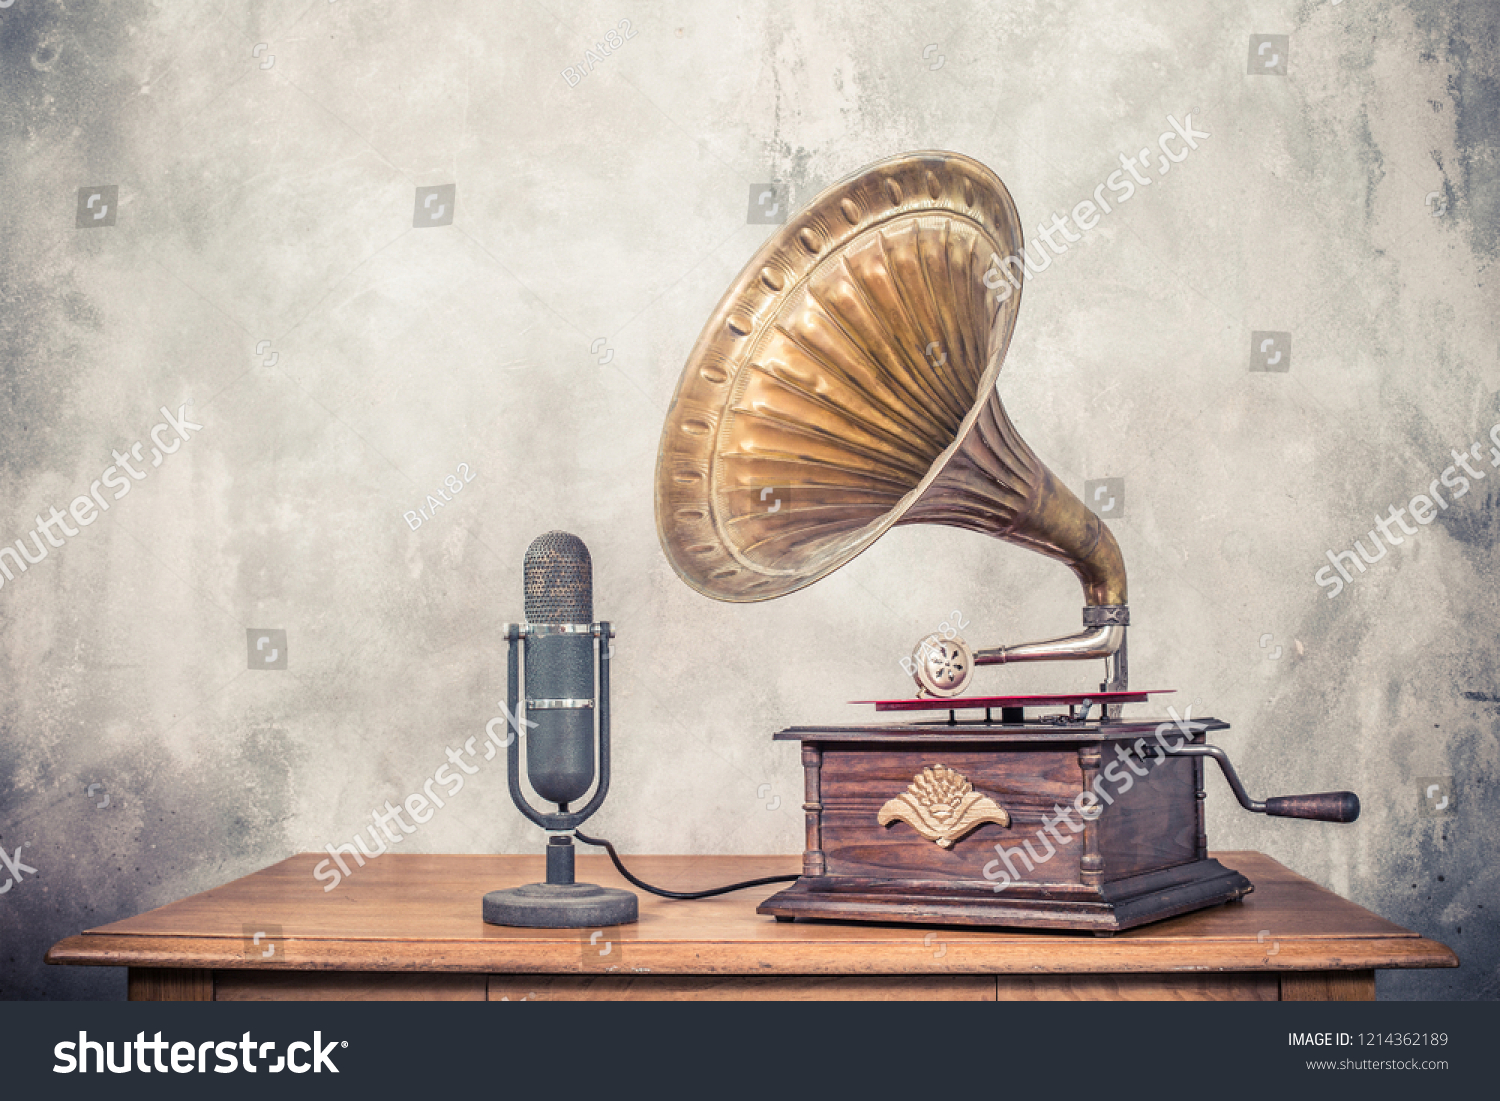 Vintage antique gramophone phonograph turntable with brass horn and big aged studio microphone on wooden table front concrete wall background. Retro old style filtered photo #1214362189